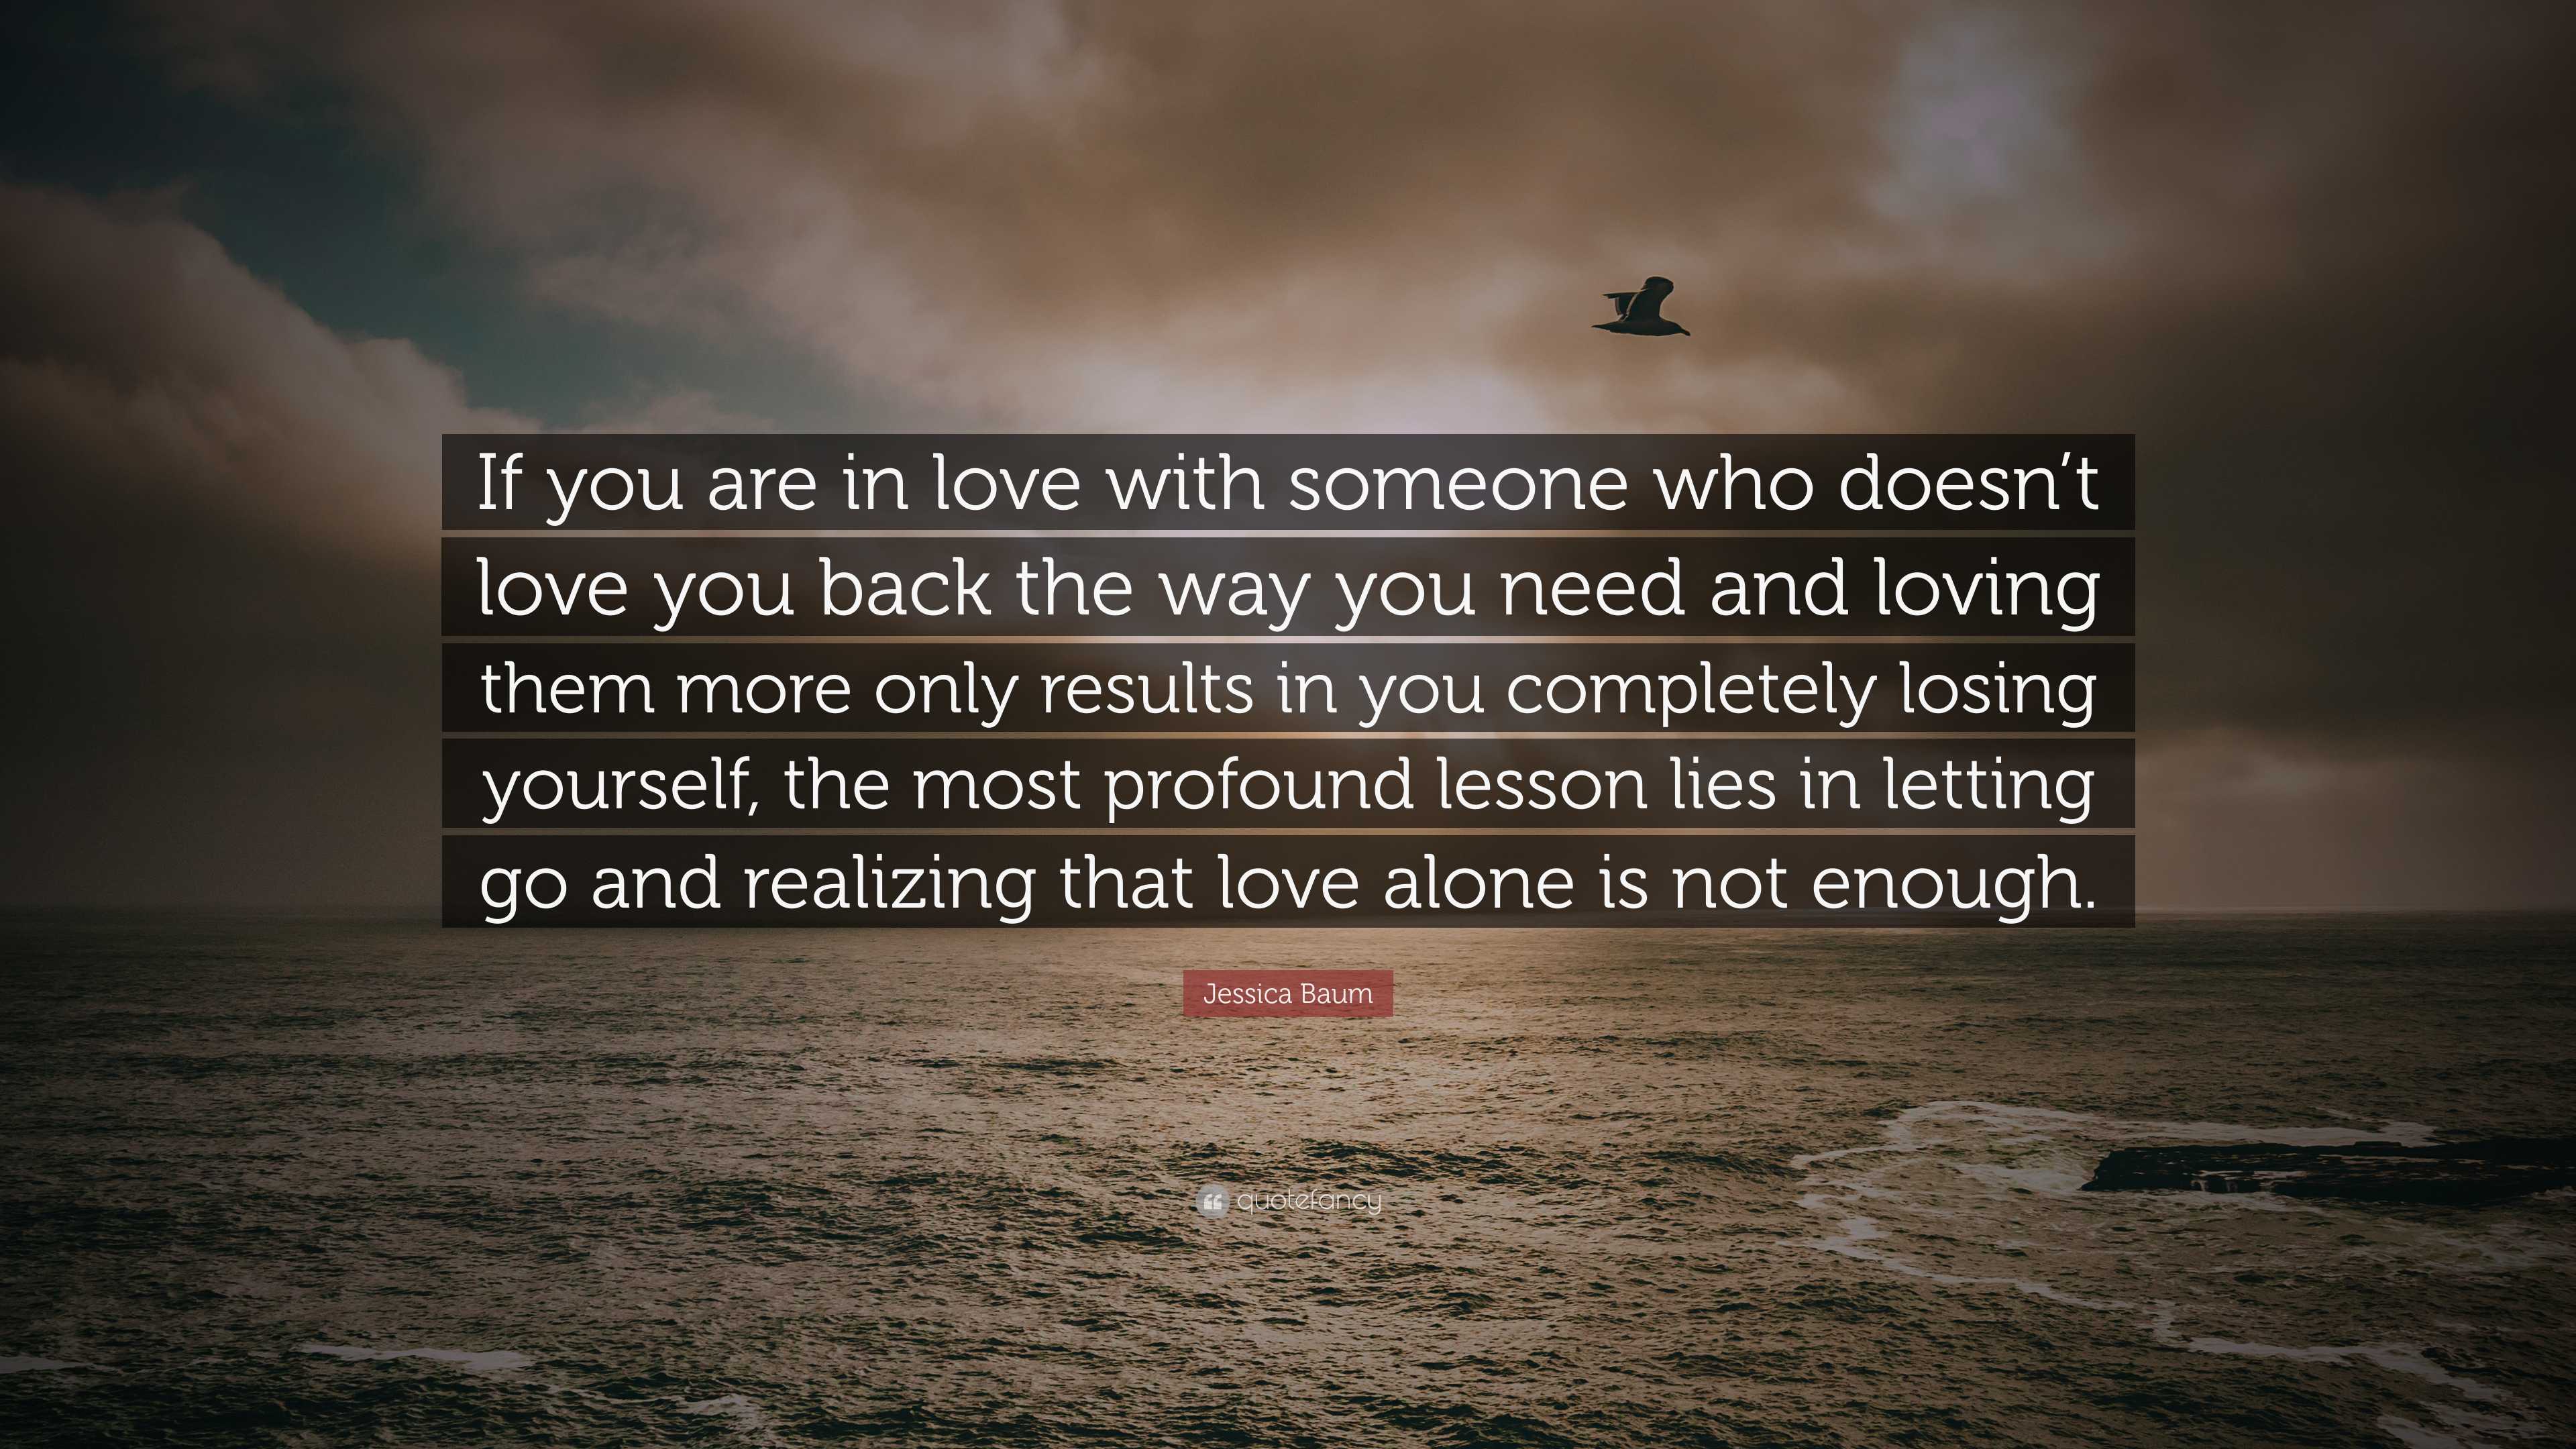 Jessica Baum Quote: “If you are in love with someone who doesn’t love ...